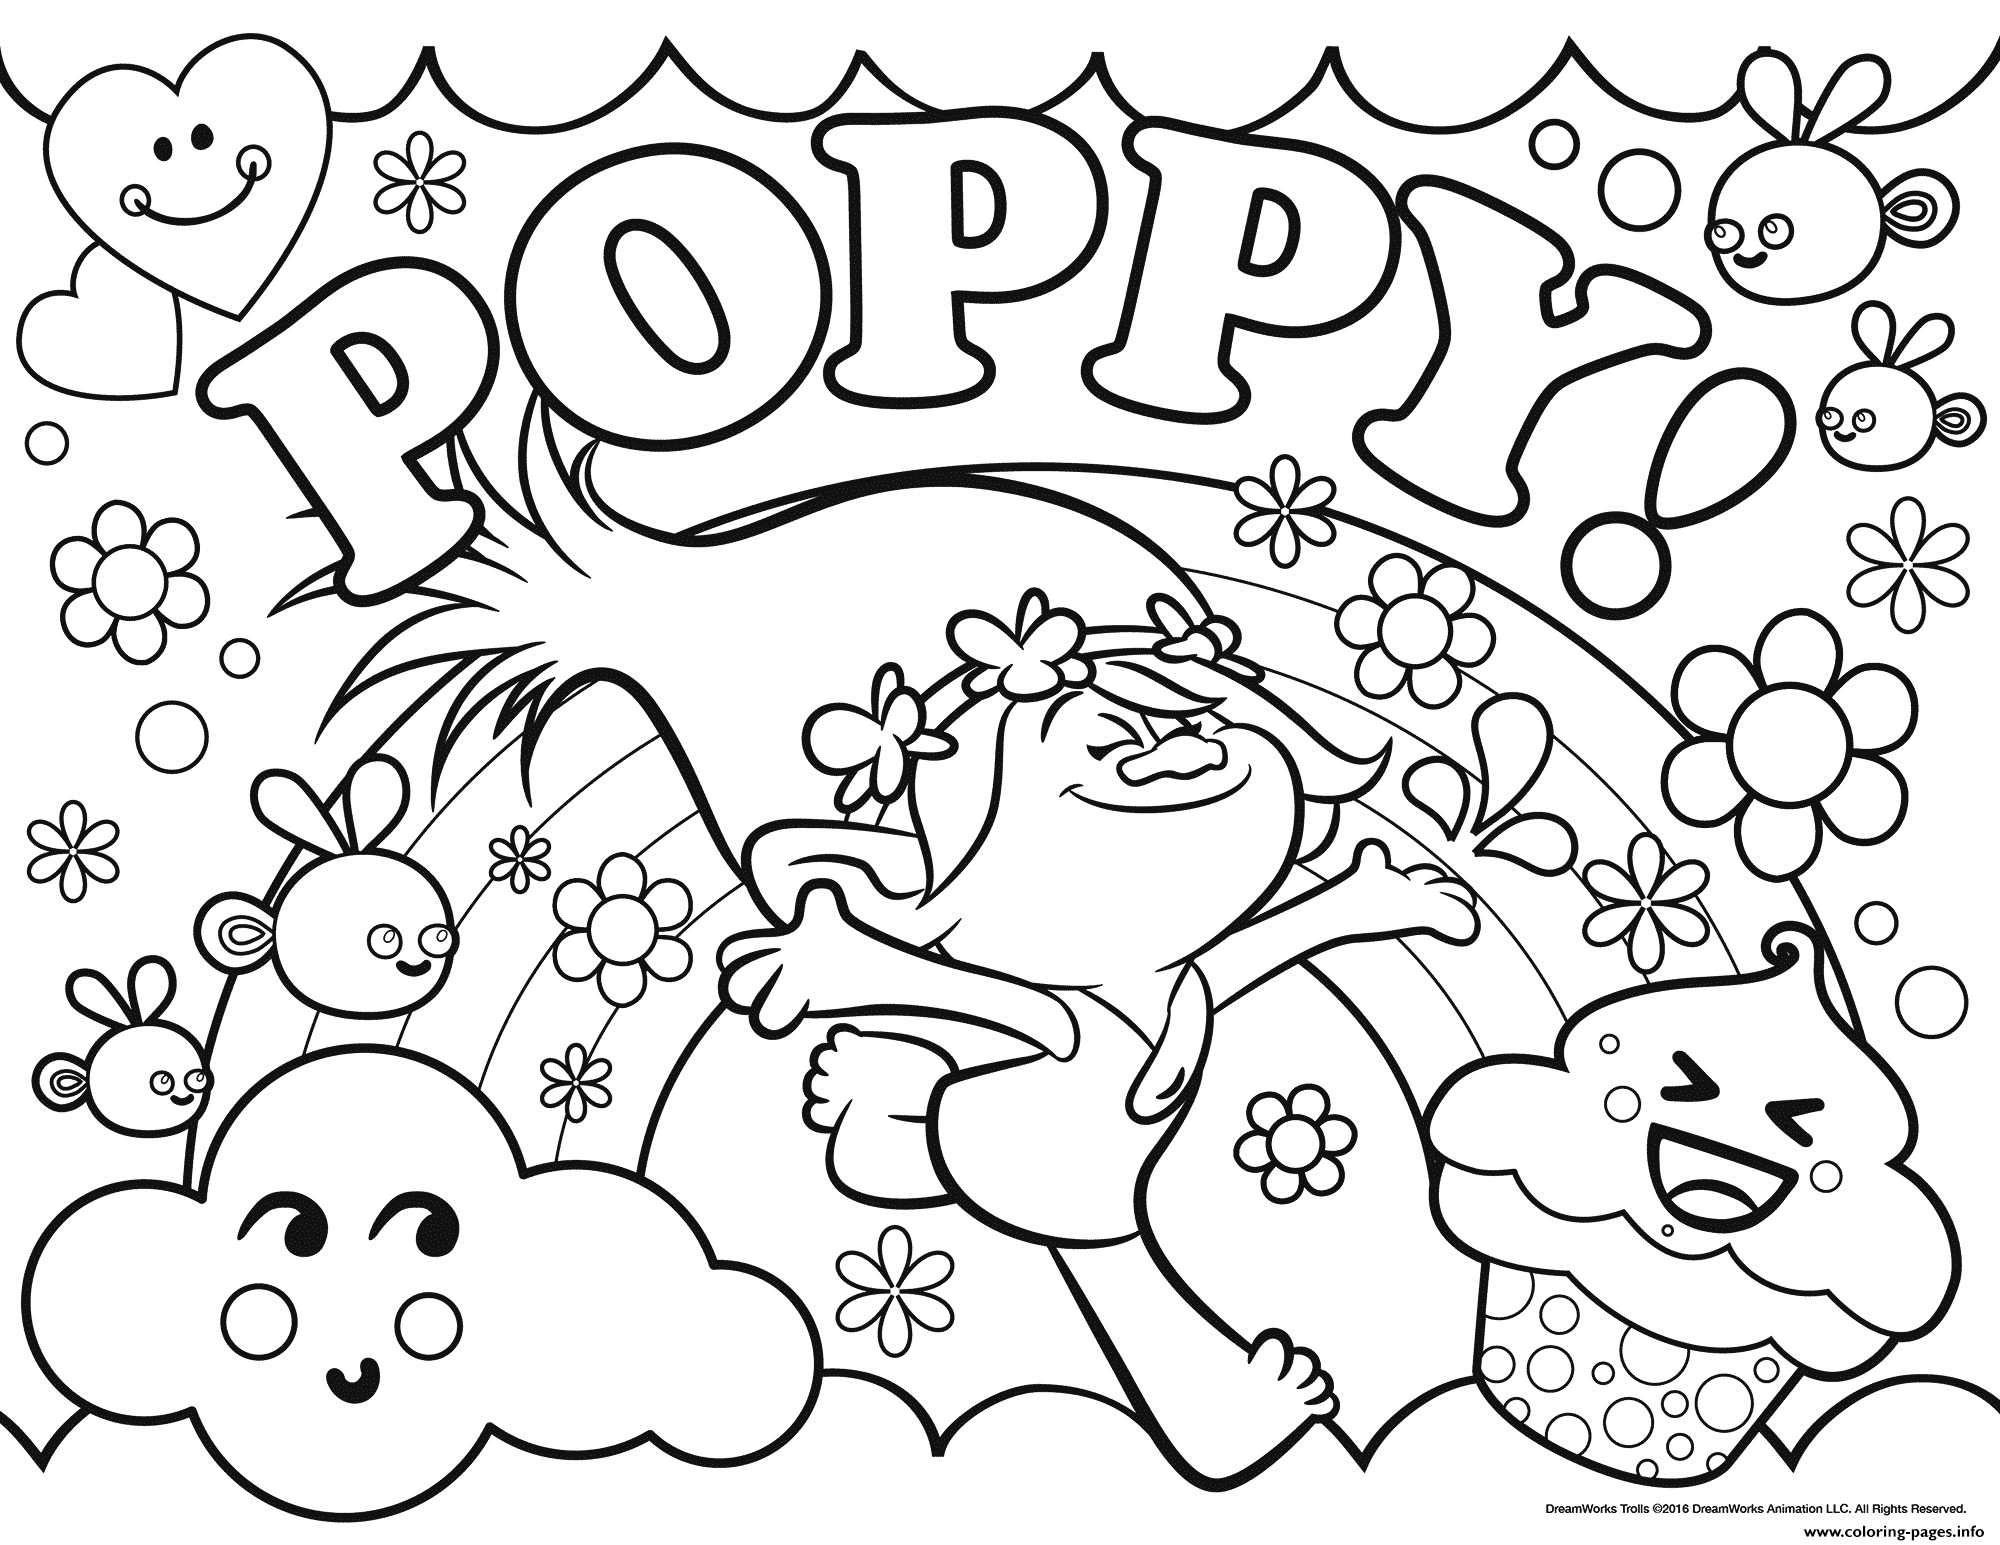 childrens-coloring-pages-trolls-of-childrens-coloring-pages-trolls Childrens Coloring Pages Trolls Cartoon 